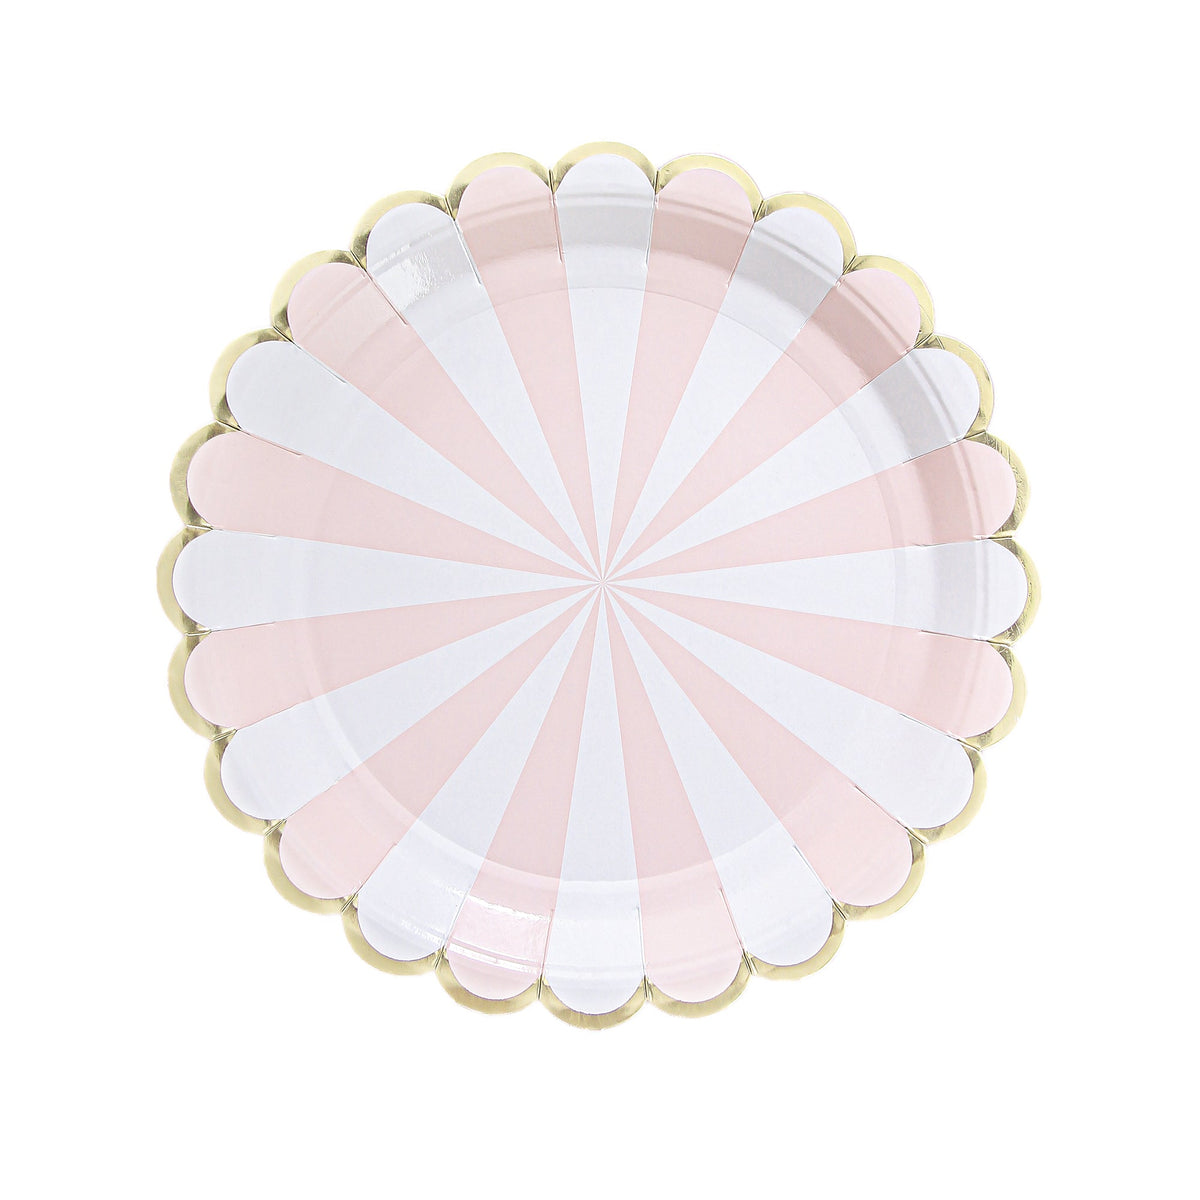 YIWU SANDY PAPER PRODUCTS CO., LTD Everyday Entertaining Candy Land Small Dessert Paper Plates, Light Pink, 7 Inches, 8 Count